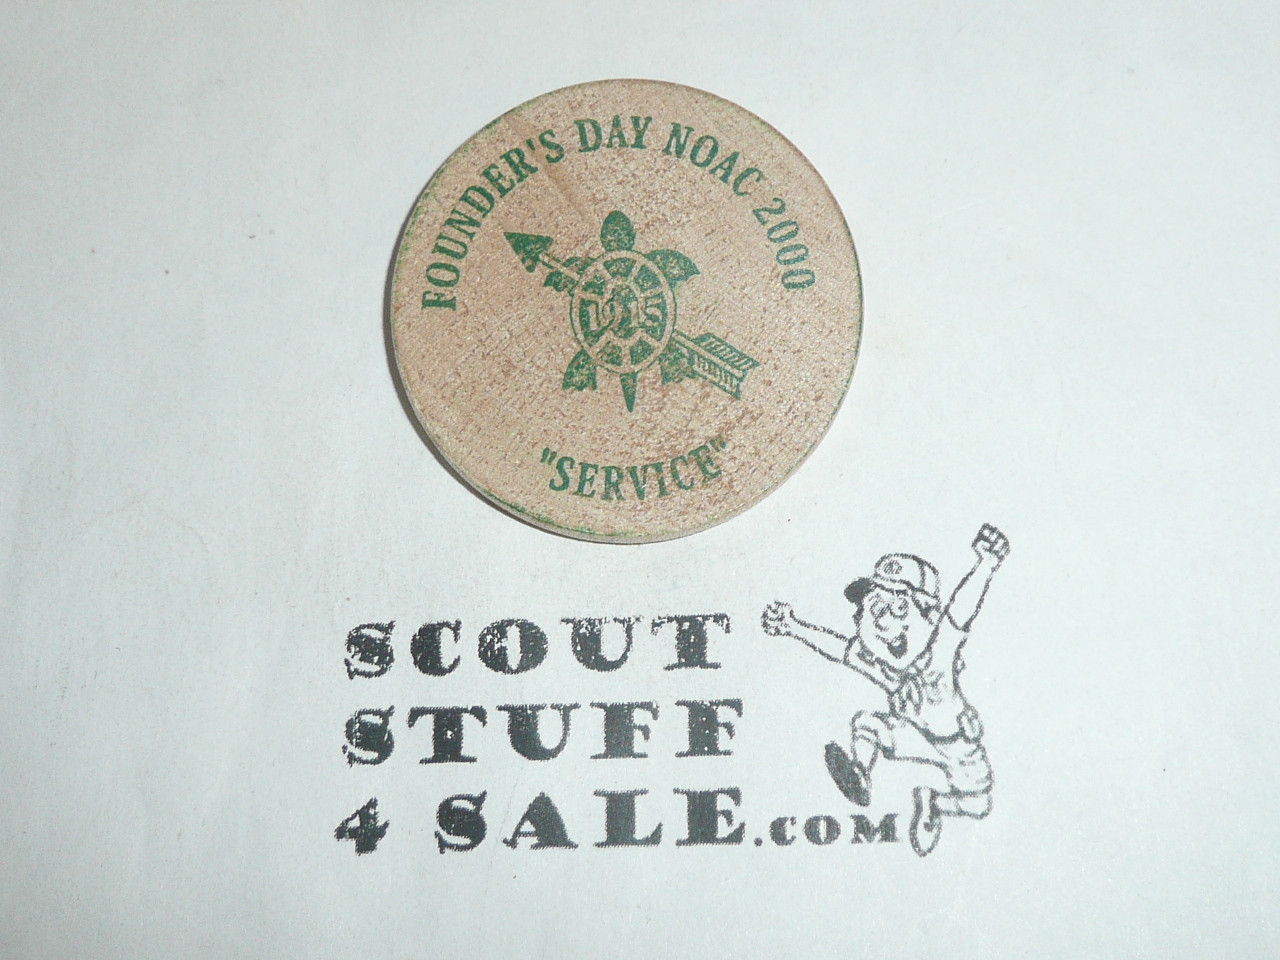 National Order of the Arrow Conference (NOAC), 2000 Founder's Day Service Wooden Nickel